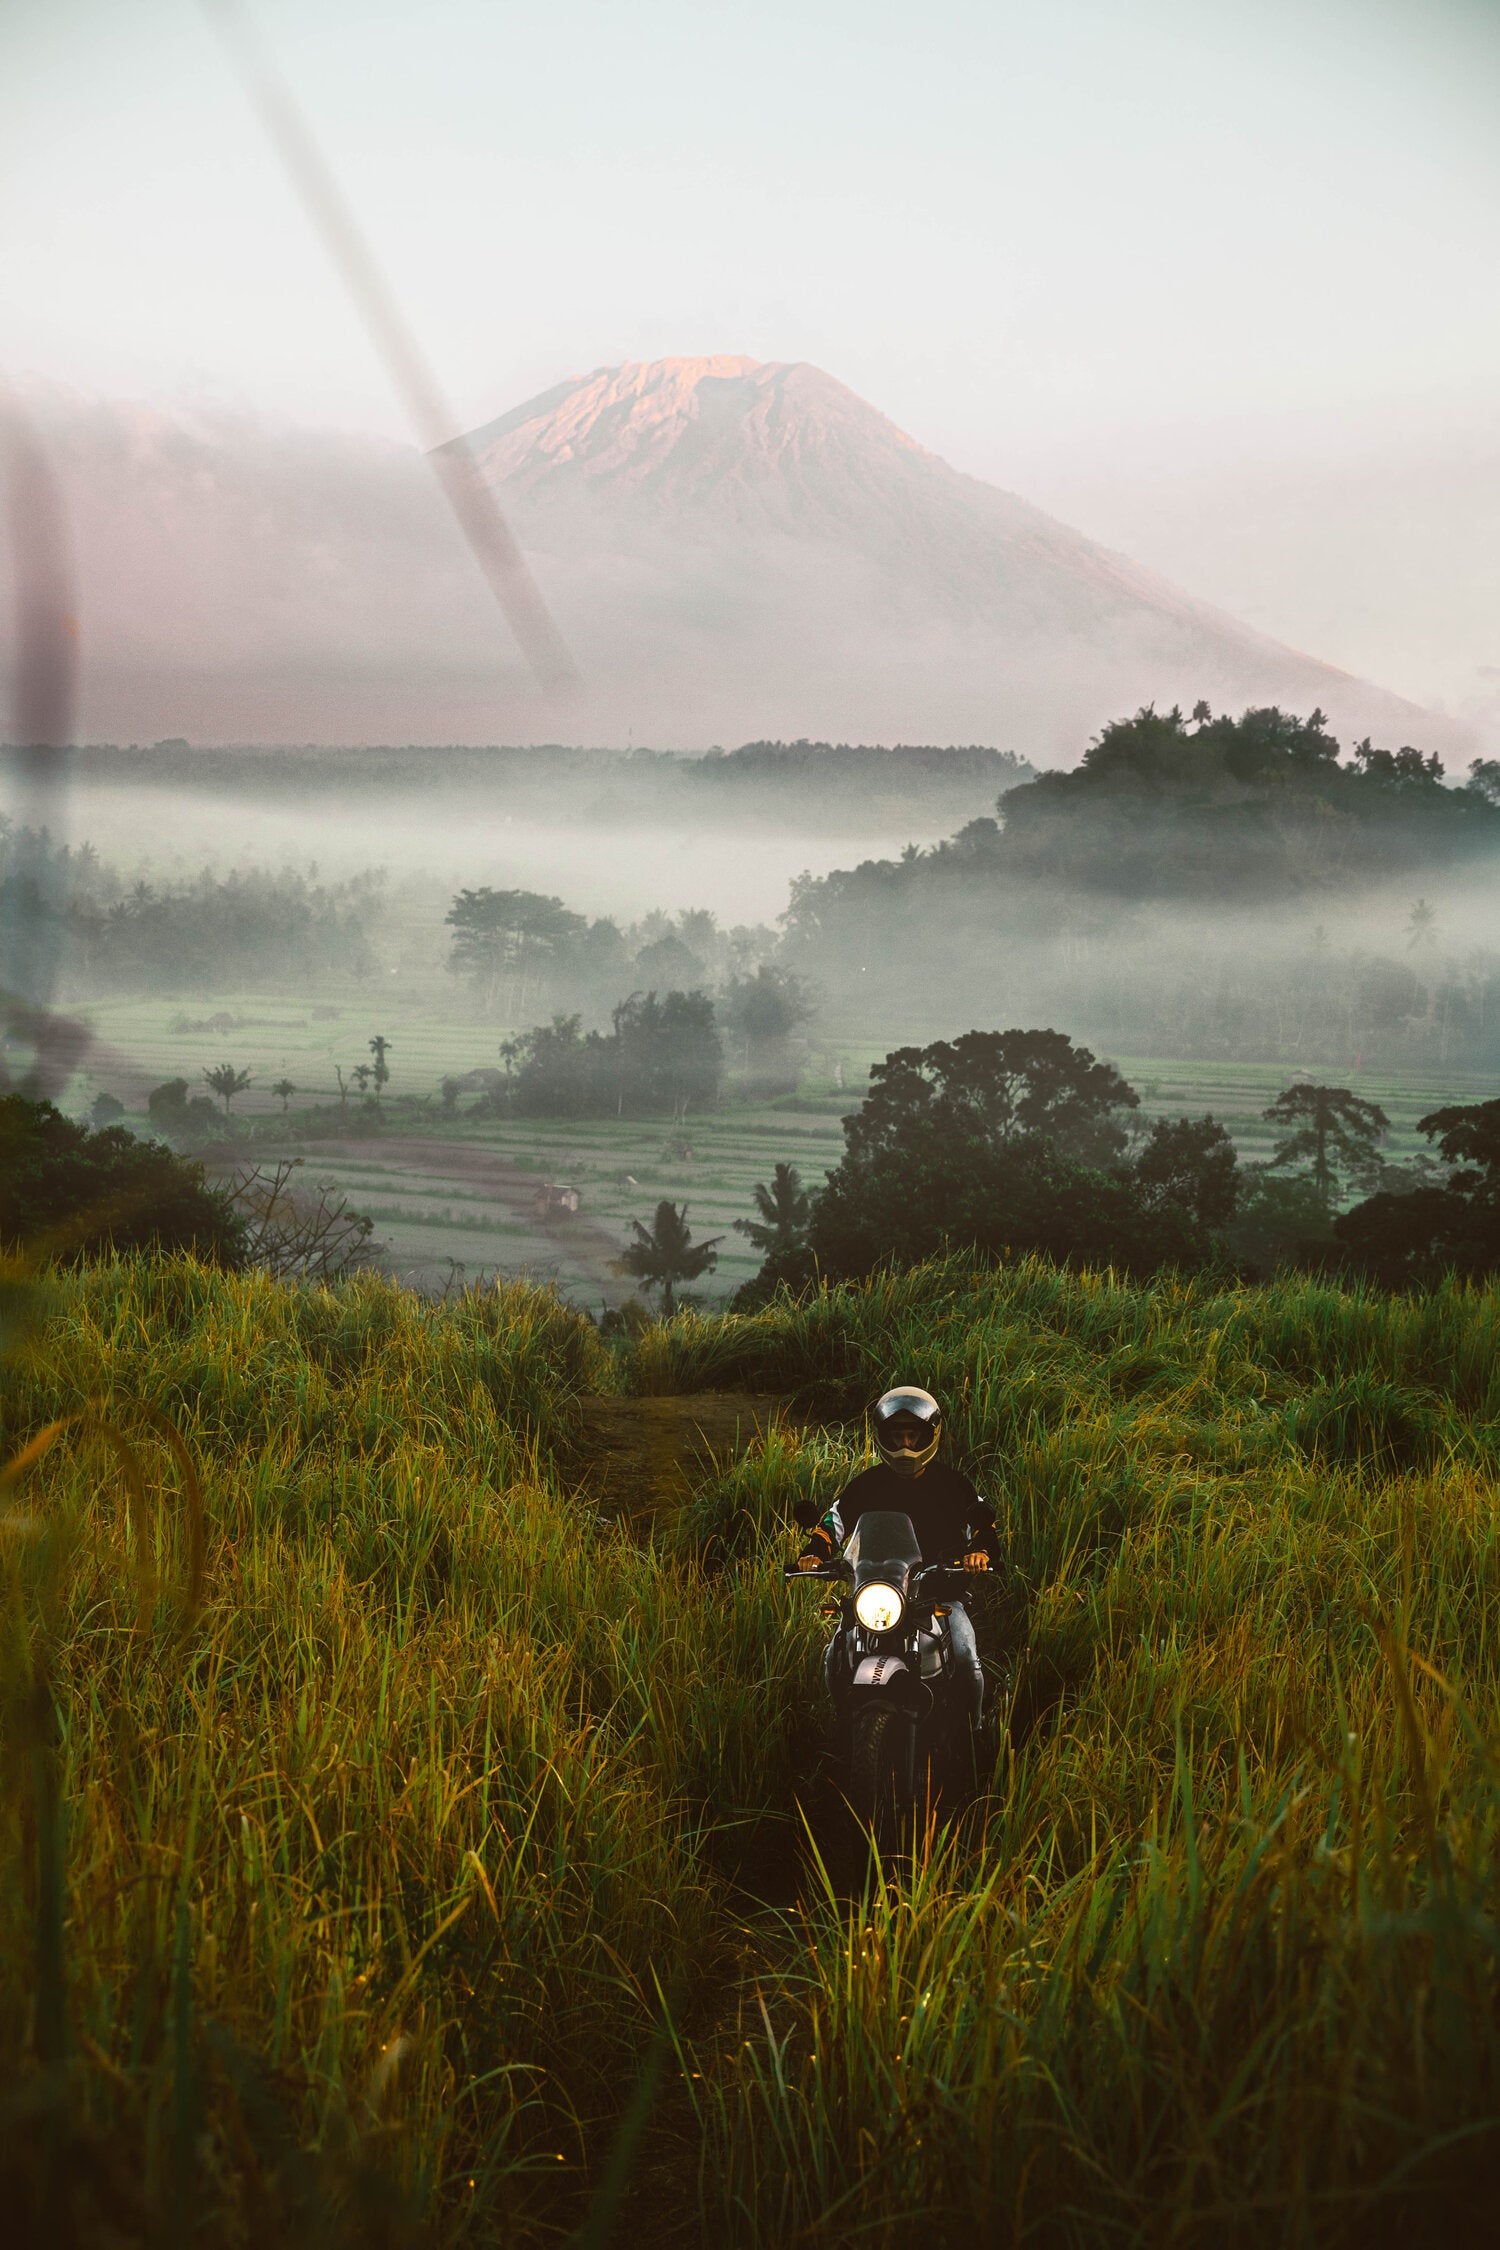 Lost LeBlanc on scooter with Mount Agung in background, Bali